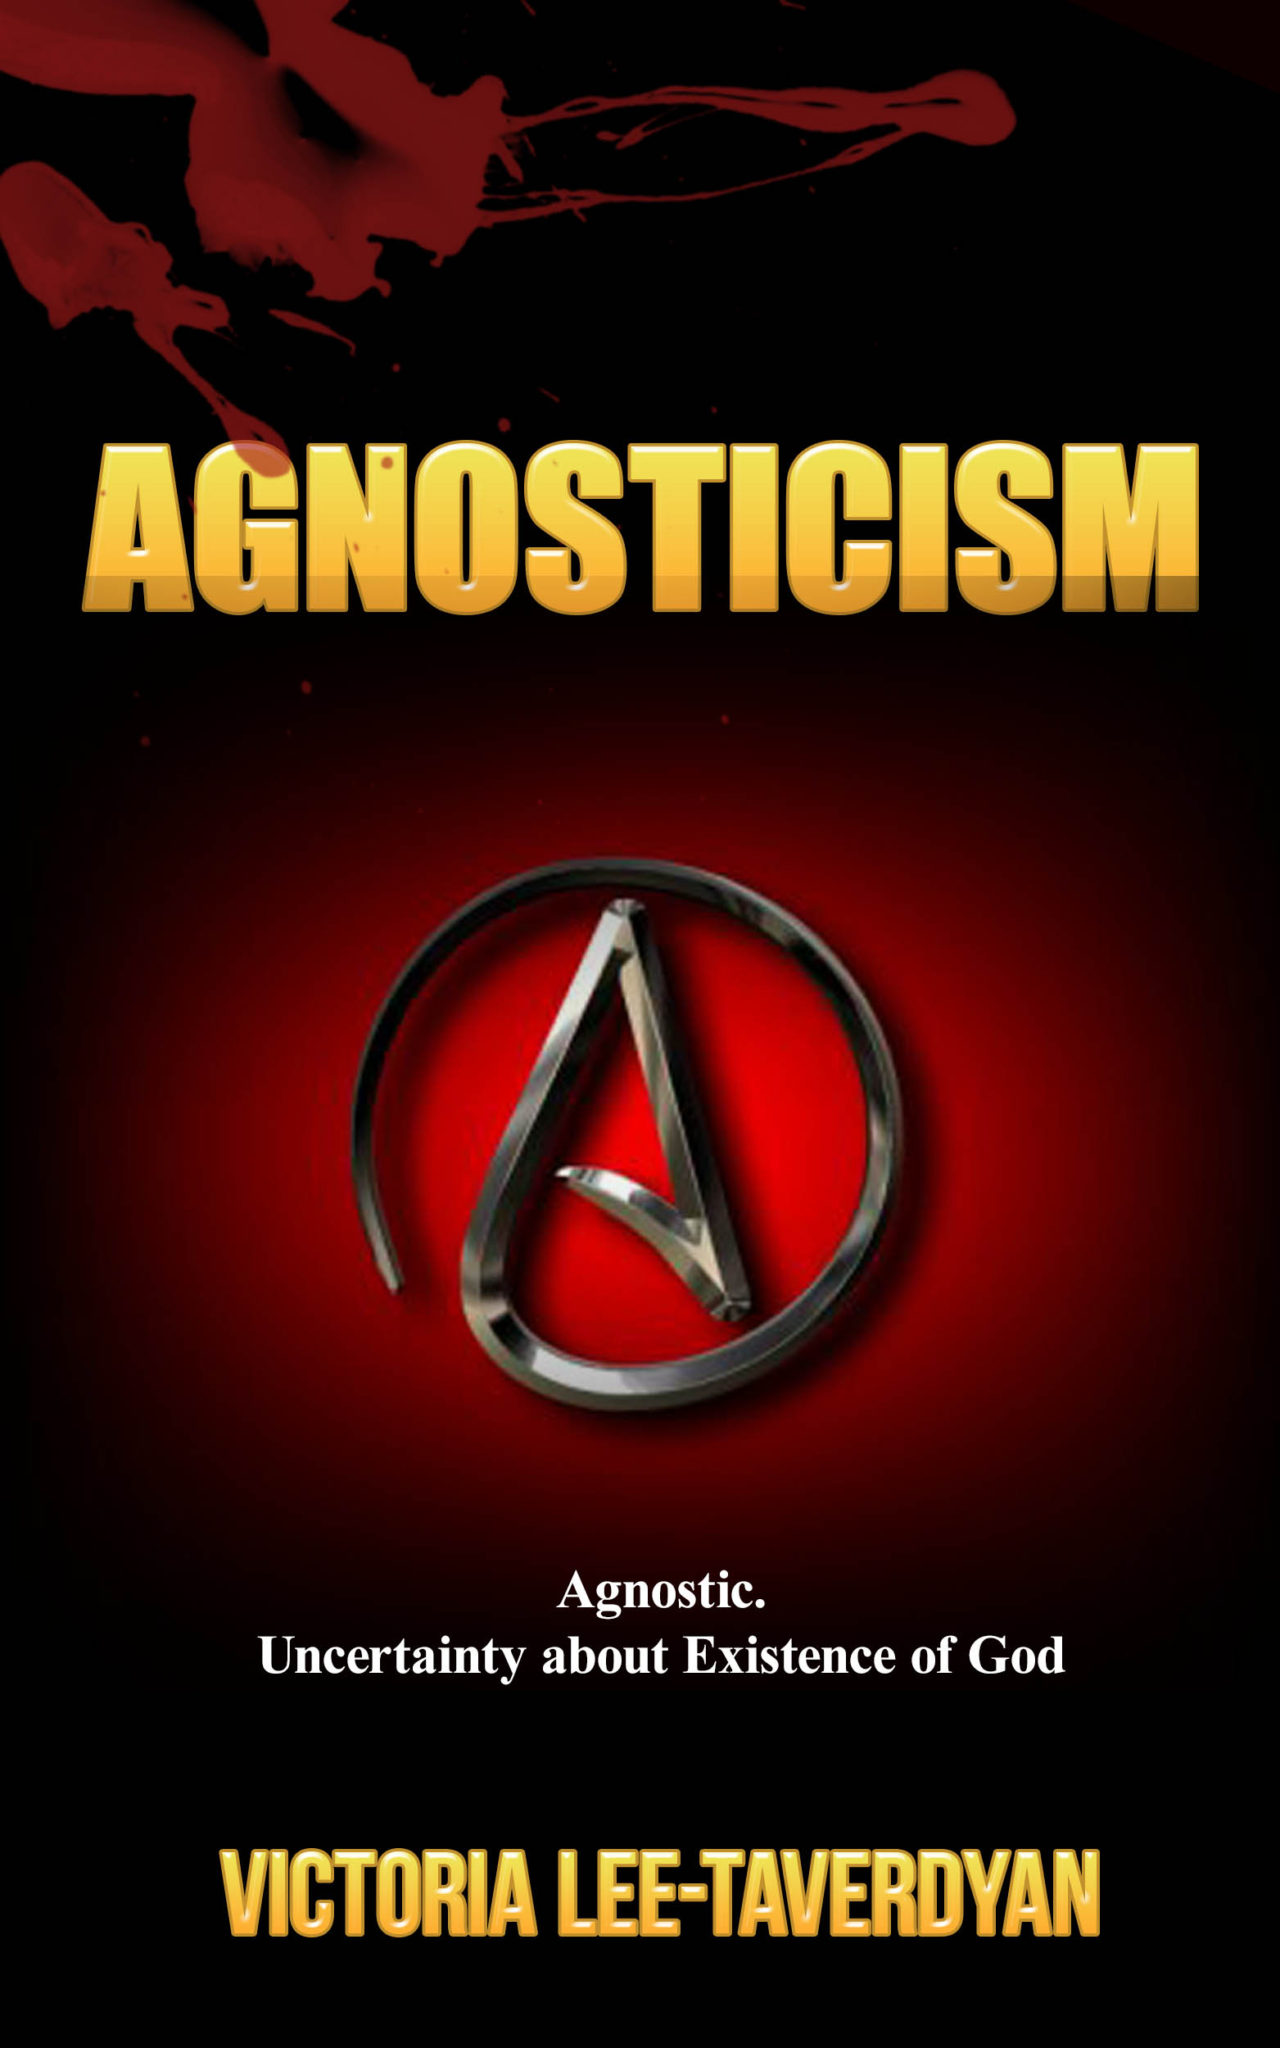 FREE: AGNOSTICISM: Agnostic. Uncertainty about Existence of God by Victoria Lee-Taverdyan